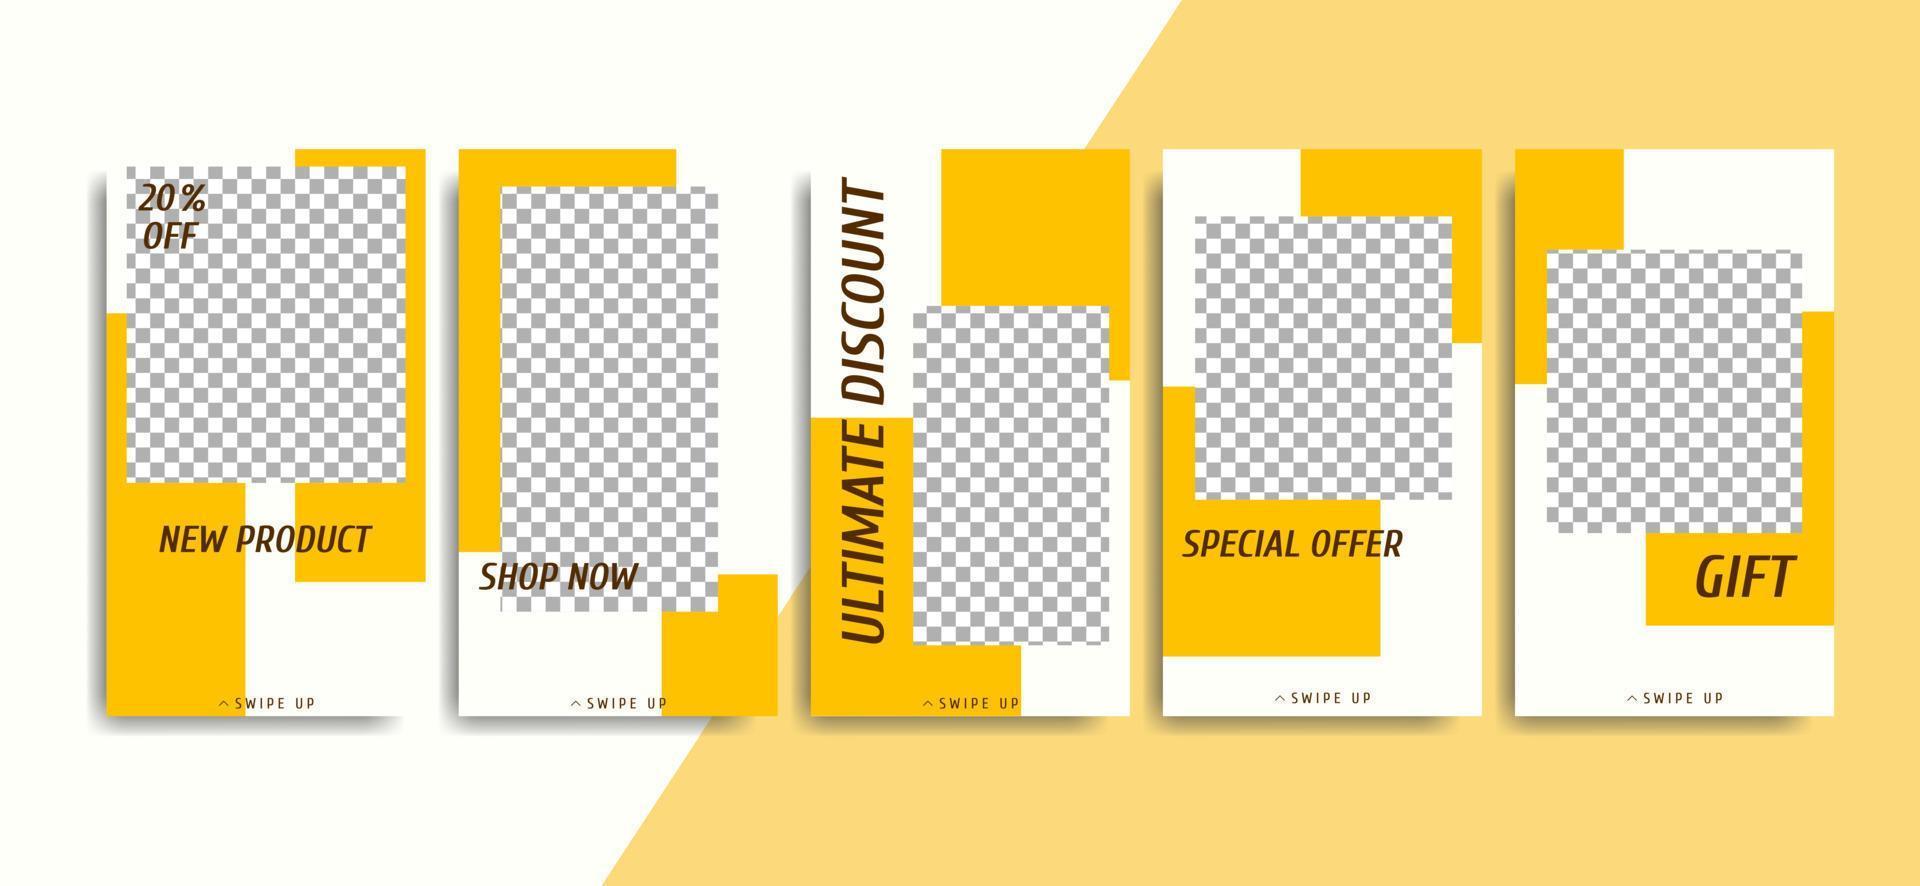 Trendy editable template for social media story, selling your product, vector illustration. Social media background design in yellow tones.